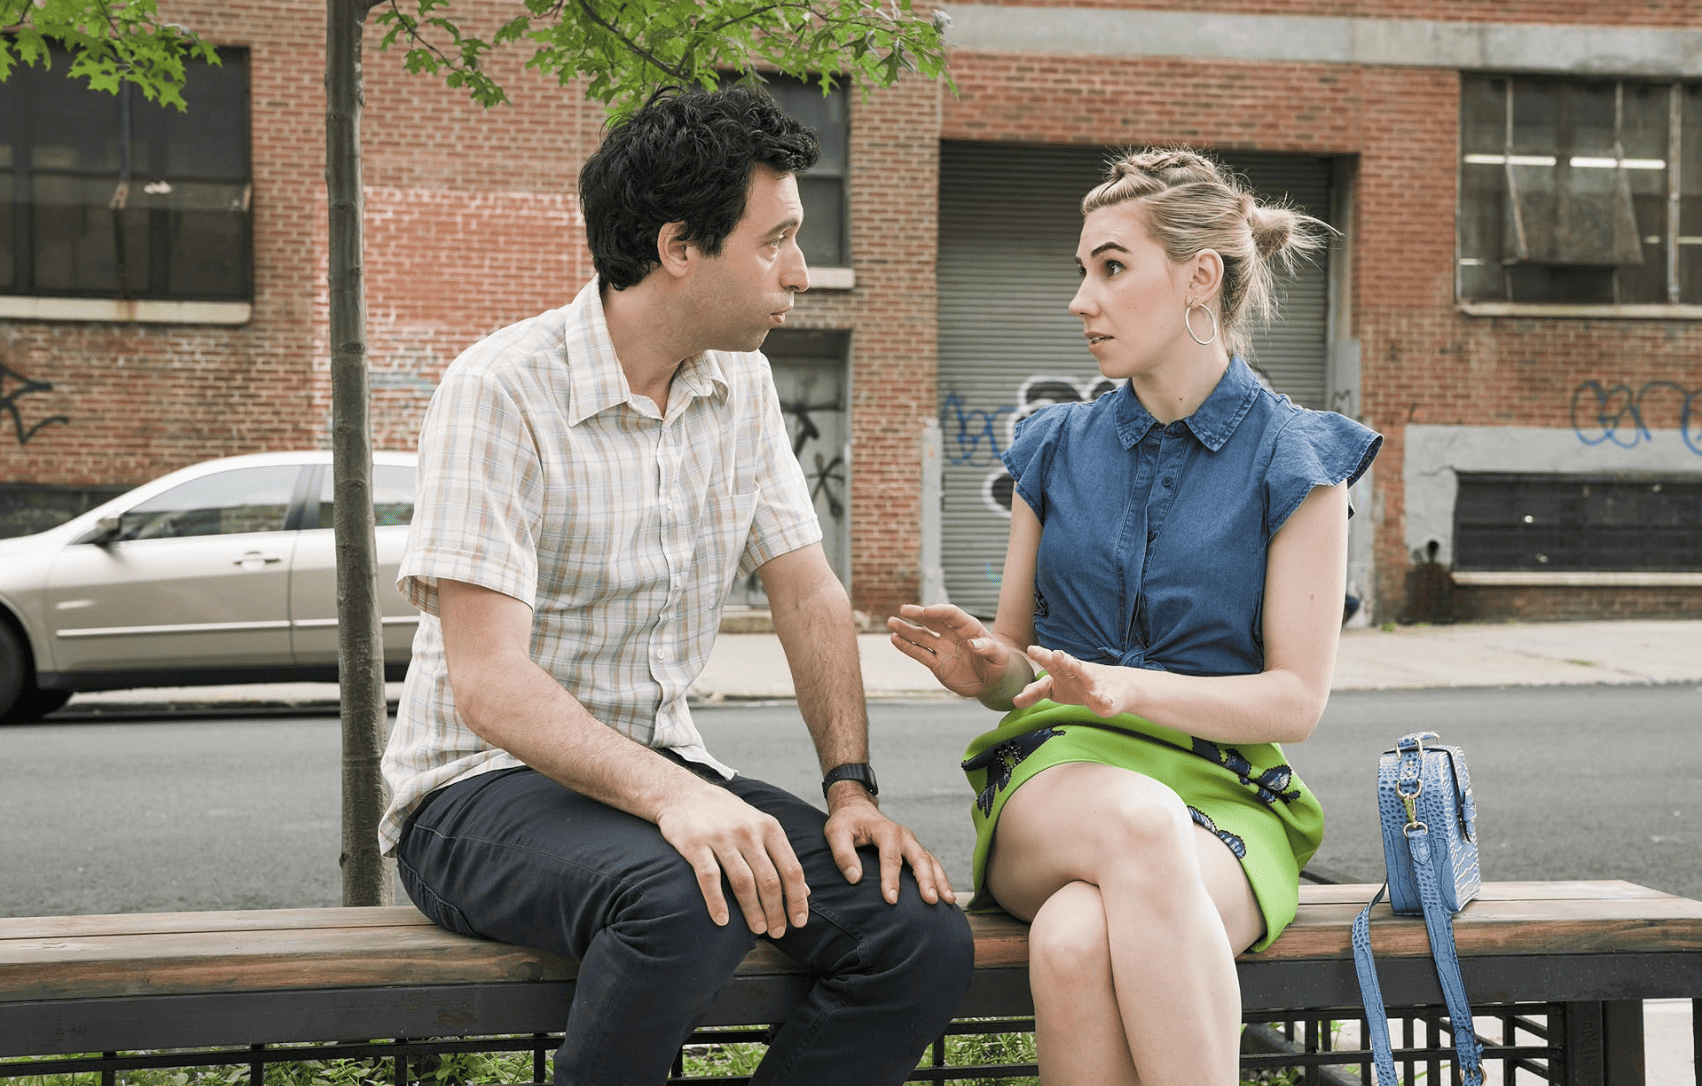 A man and a woman have a conversation while sitting on a sidewalk bench in this image from Apatow Productions.